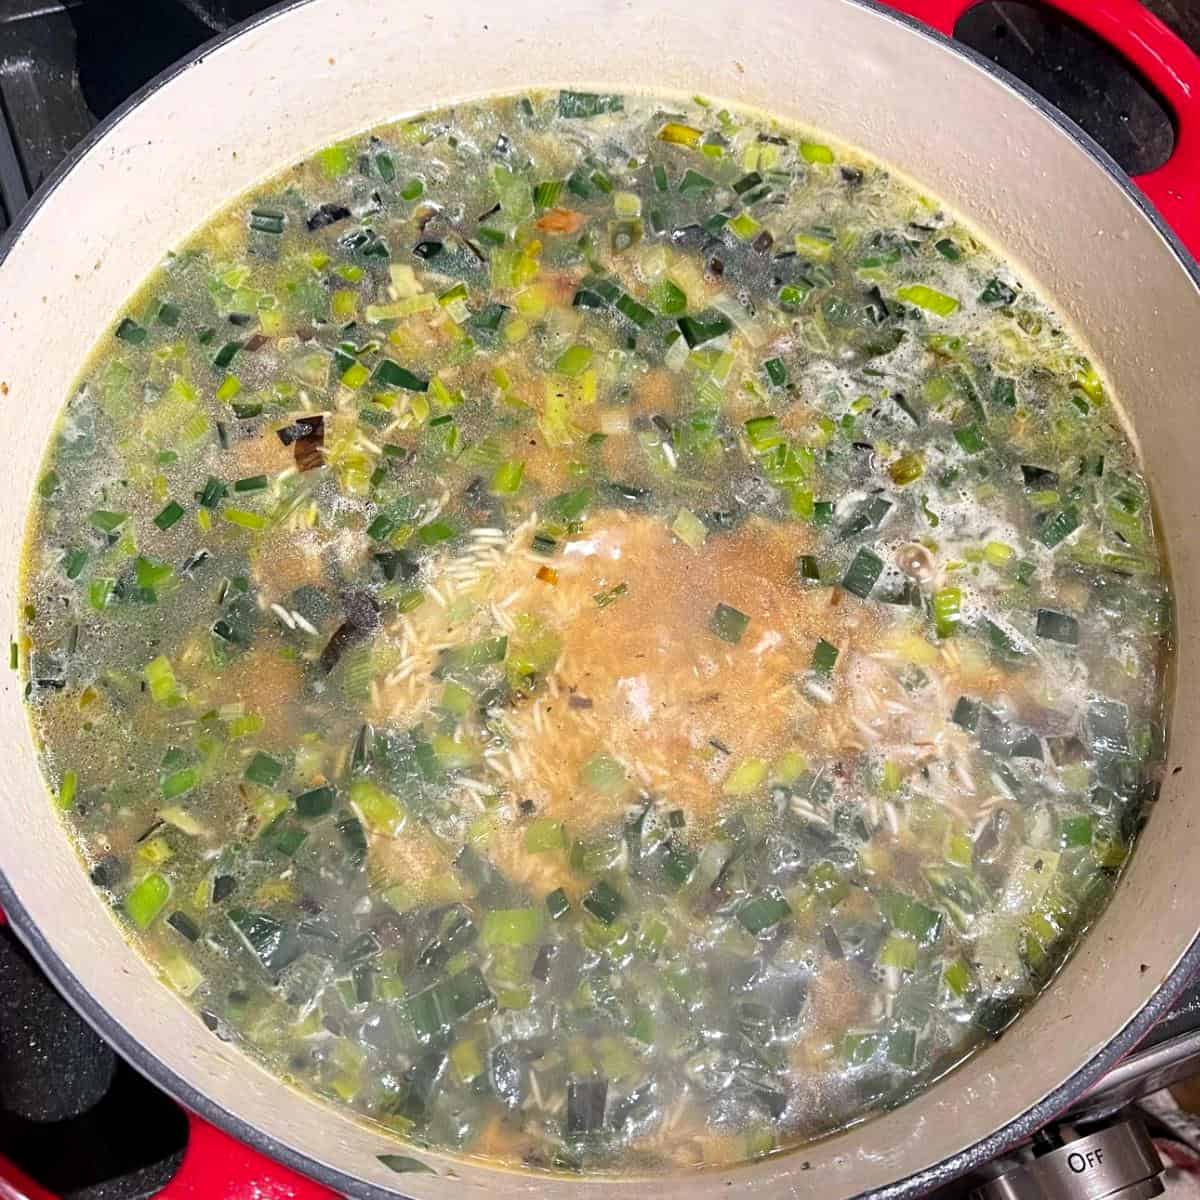 Water added to leeks and rice in skillet.